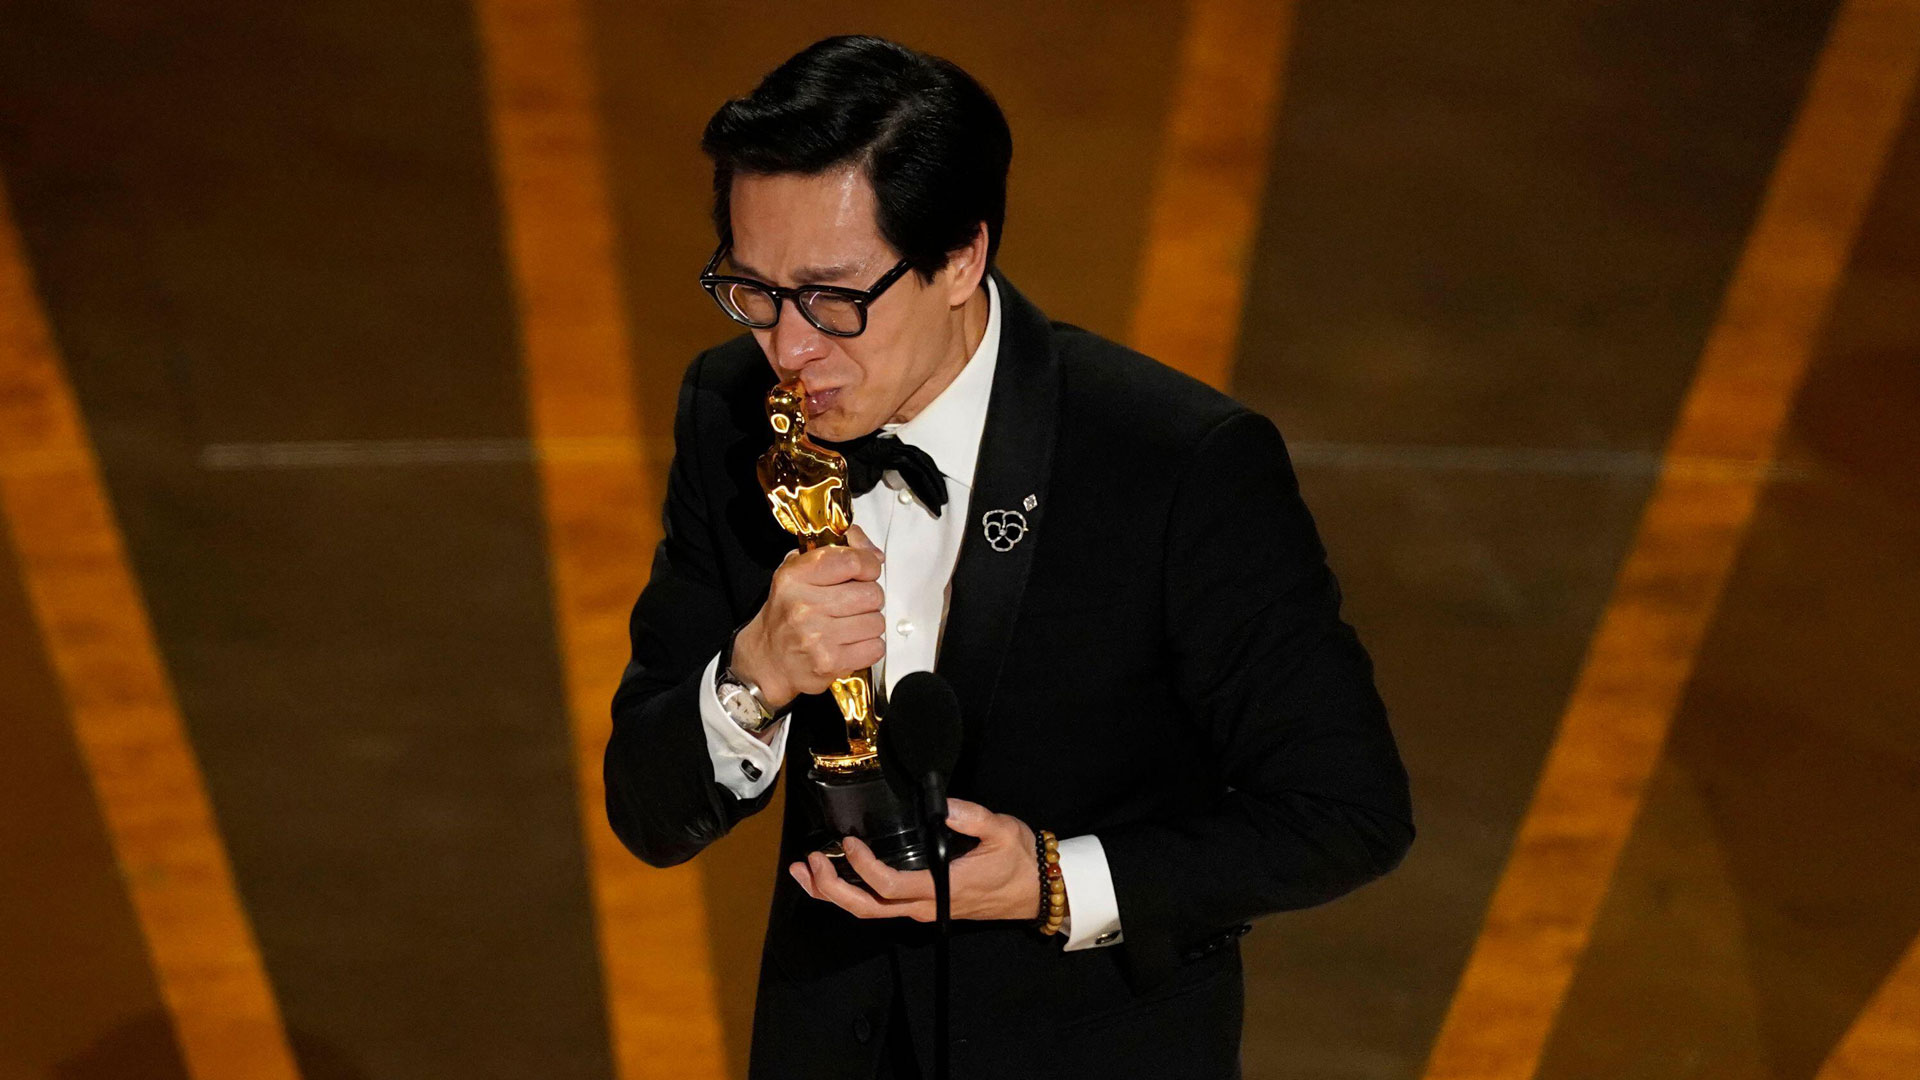 Ke Huy Quan kisses his Oscar statuette as he accepts the award for best performance by an actor in a supporting role for Everything Everywhere All at Once at the Oscars 2023. Photo: AP /Chris Pizzello